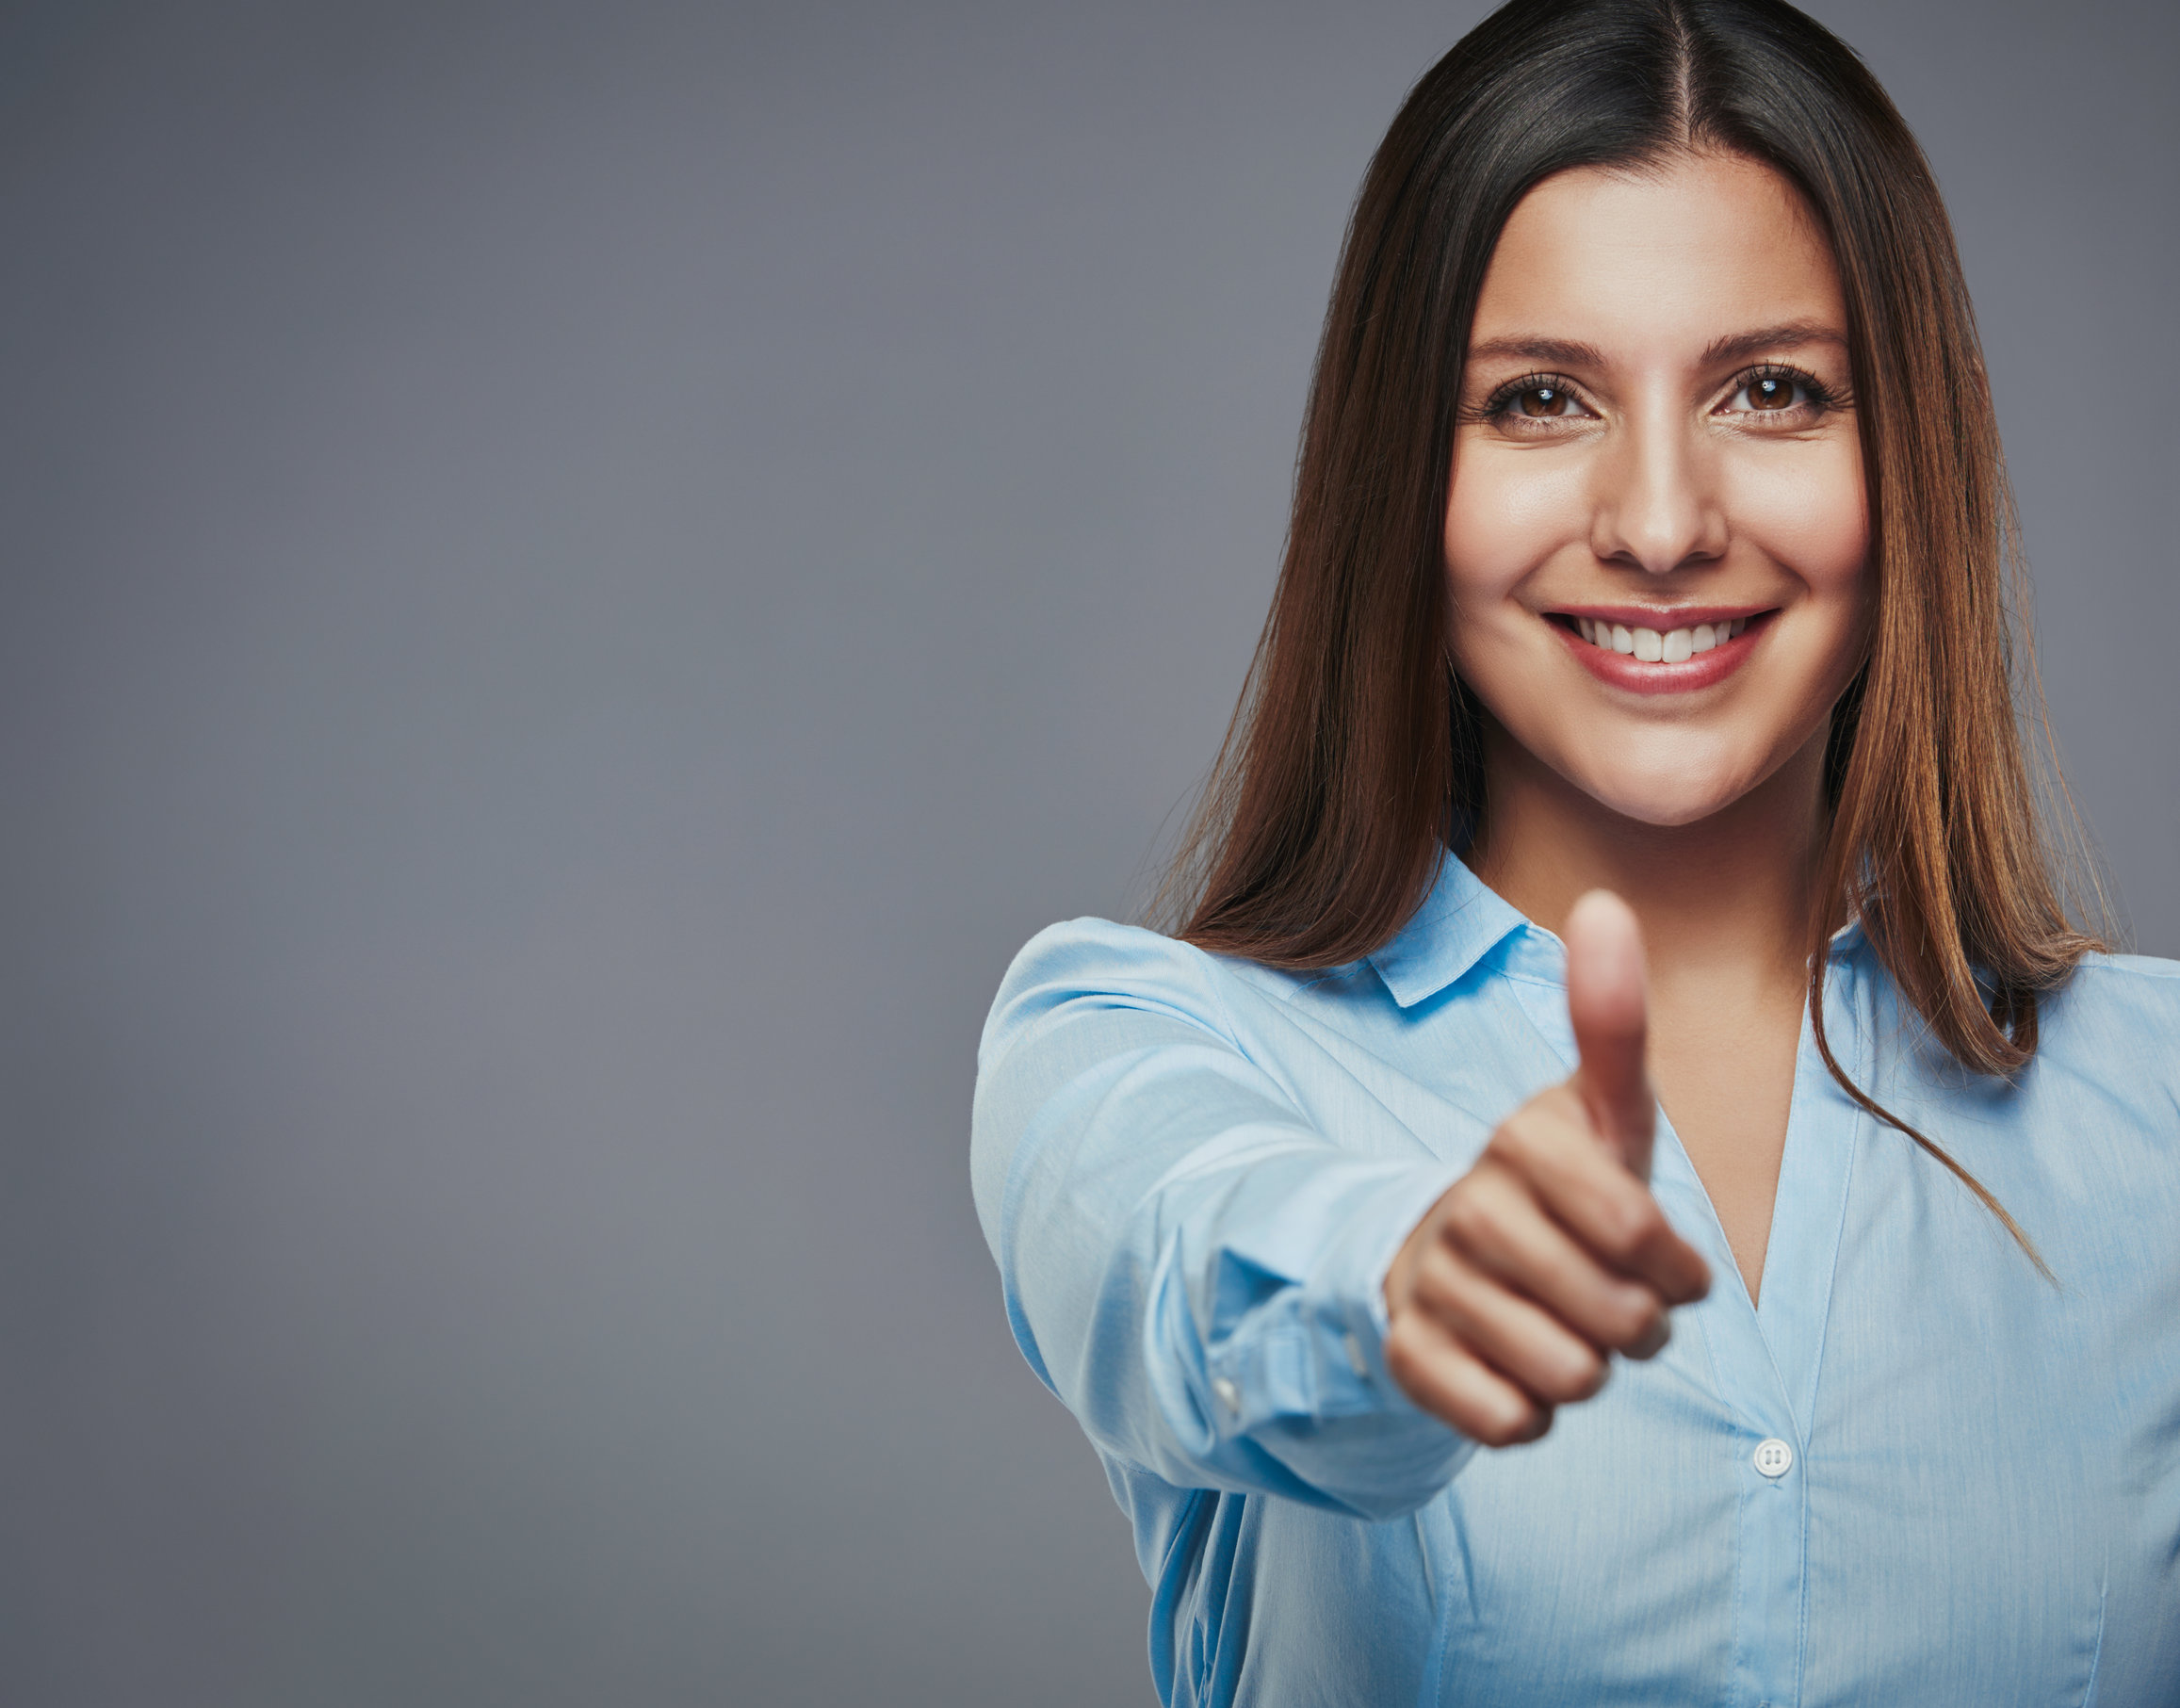 business woman giving thumbs up for business development courses to boost skills and knowledge 